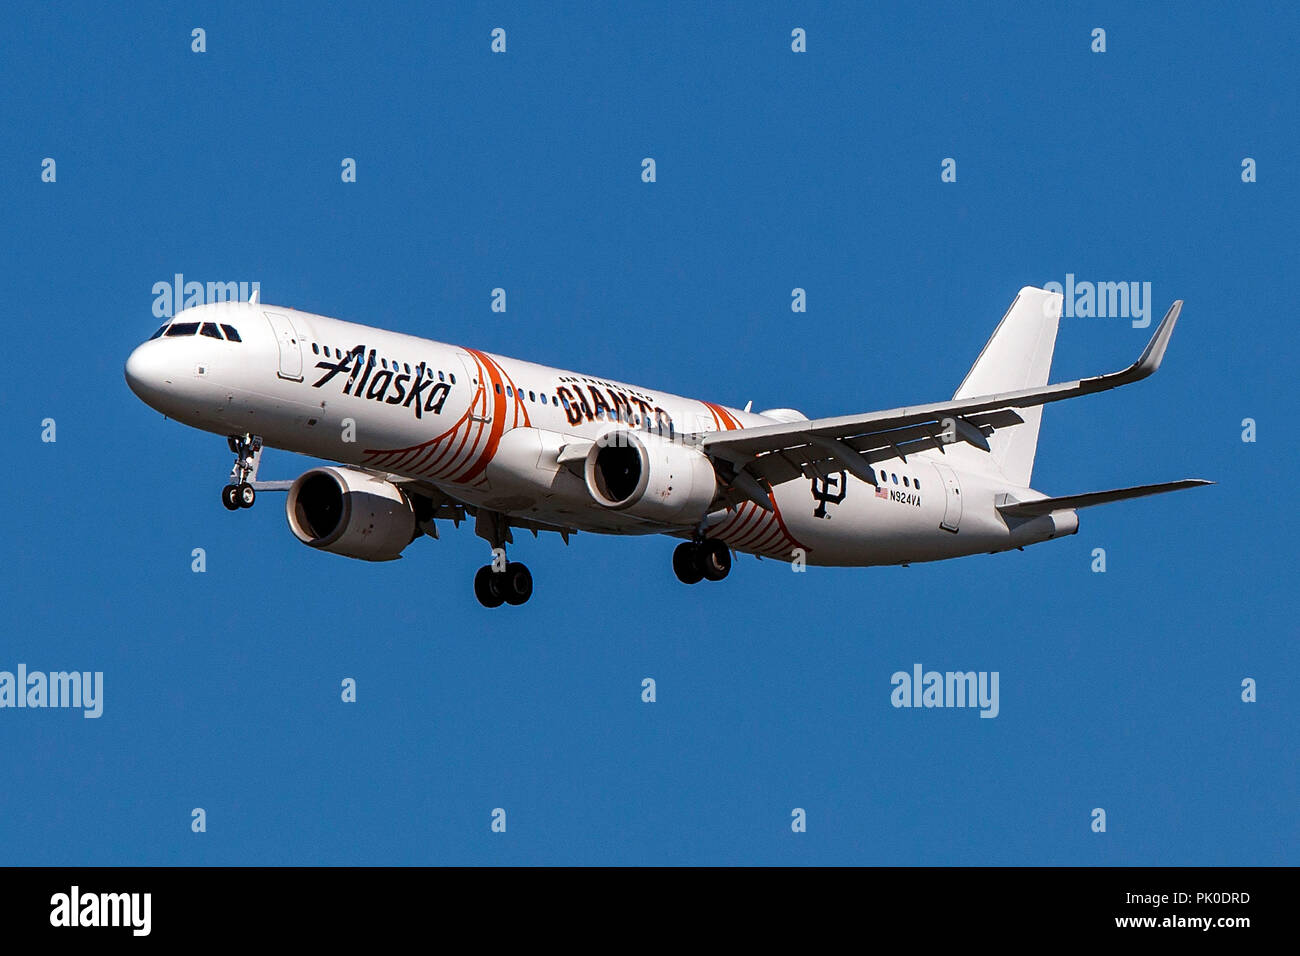 Airbus A321-253N (N924VA) operated by Alaska Airlines with the San Francisco Giants livery on approach to San Francisco International Airport (KSFO), San Francisco, California, United States of America Stock Photo